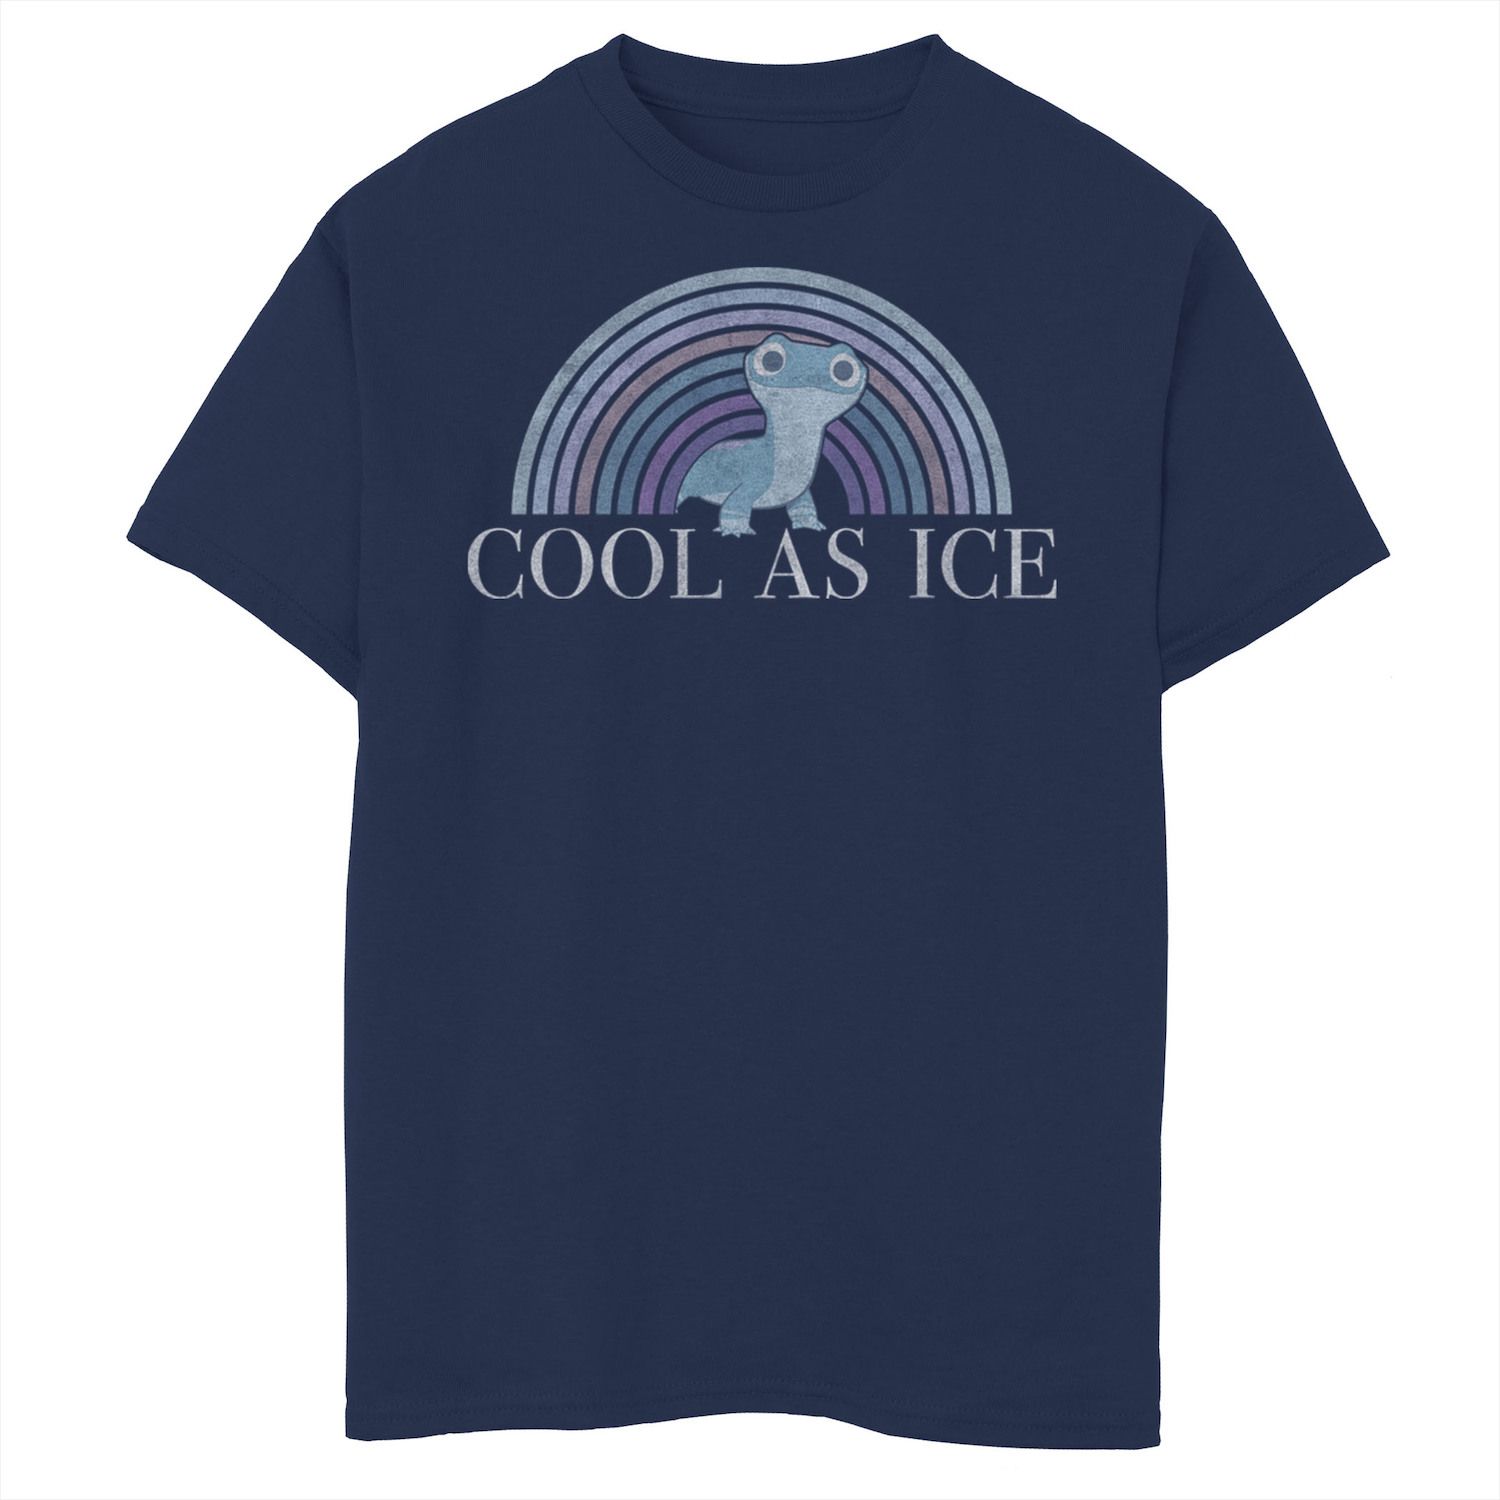 Image for Disney 's Frozen 2 Boys 8-20 Bruni The Salamander Cool As Ice Graphic Tee at Kohl's.